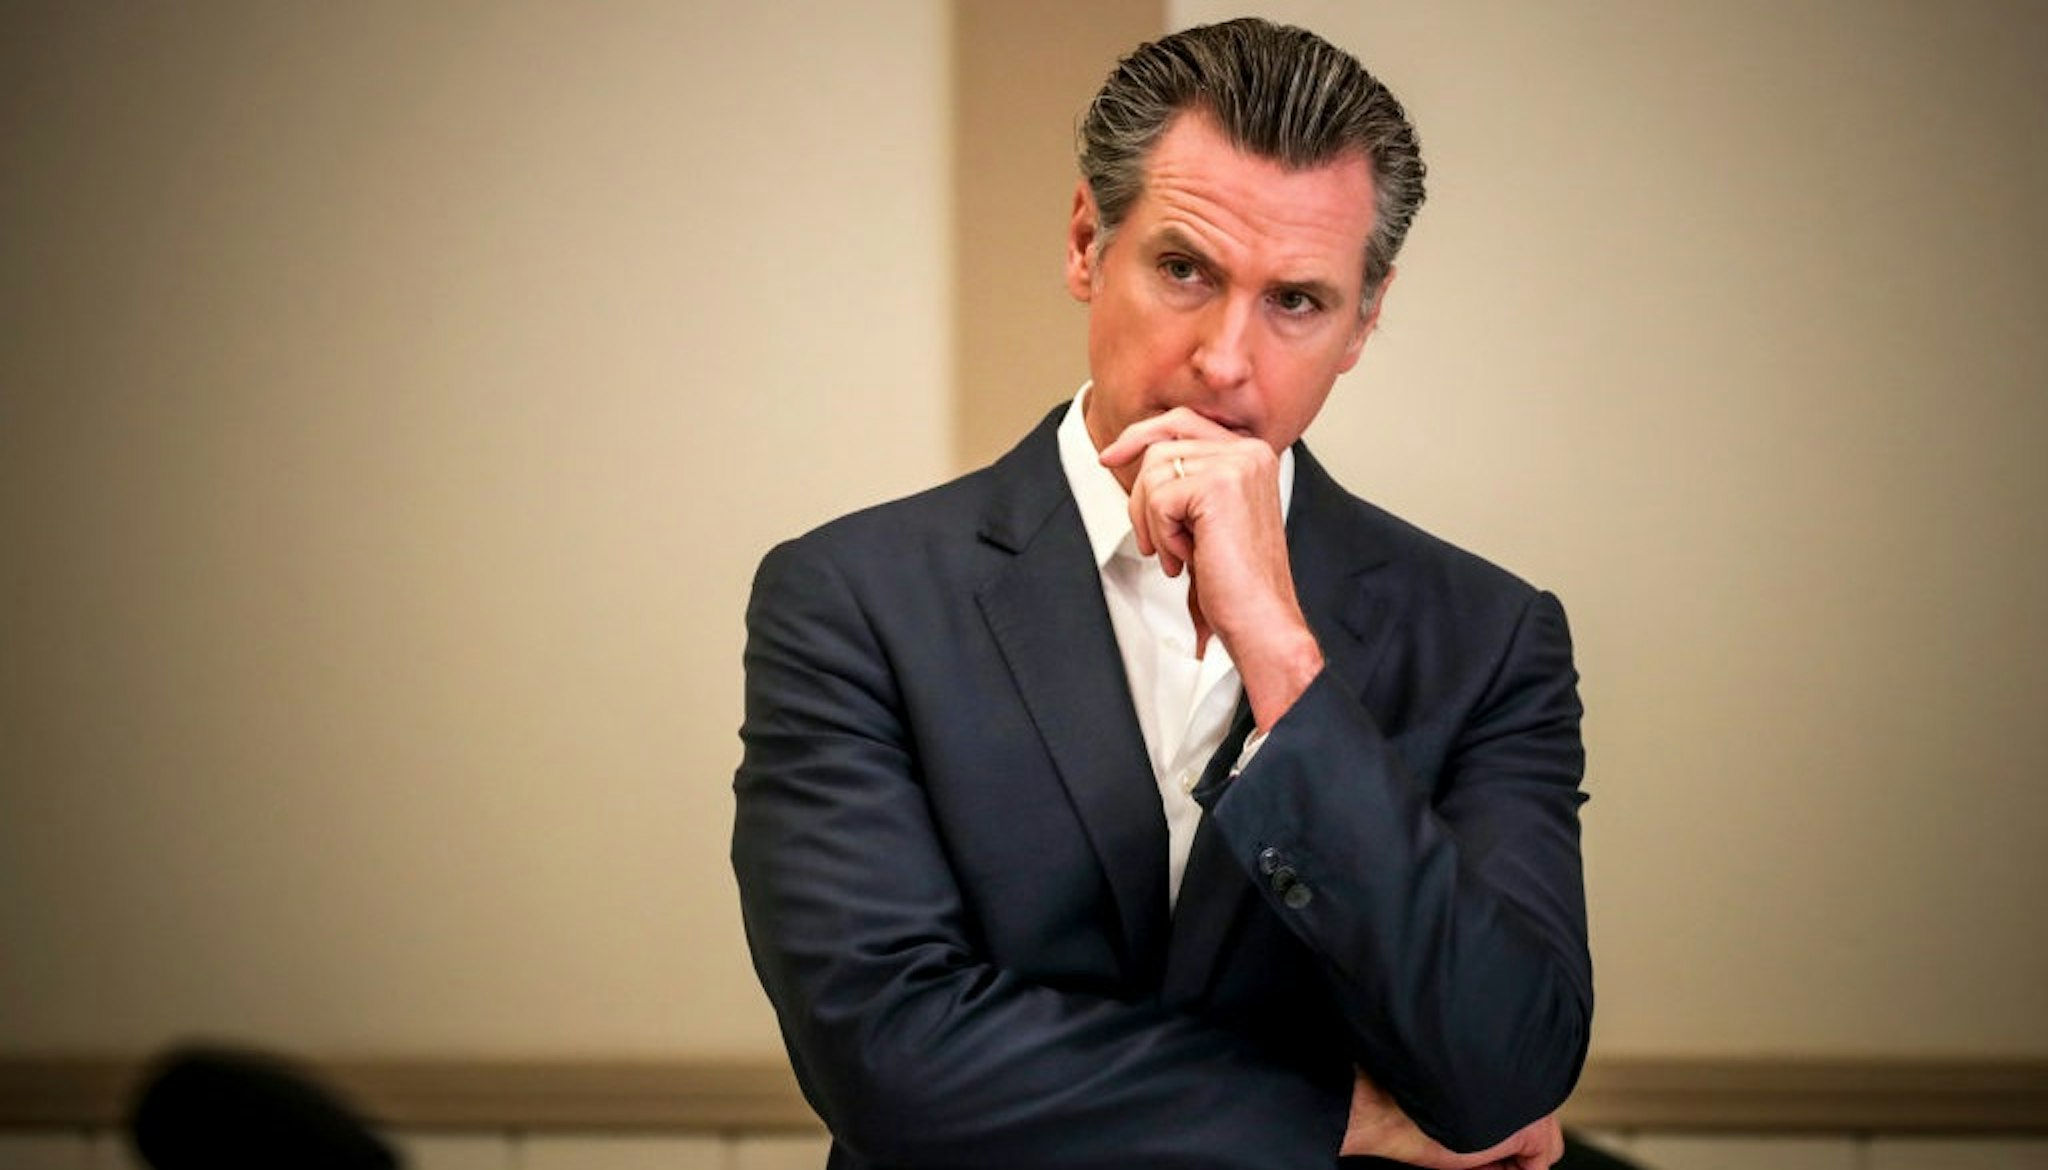 Bell Gardens, CA - July 14: Gov. Gavin Newsom presents the nation's largest rent relief program as Part of the $100 Billion California Comeback Plan.